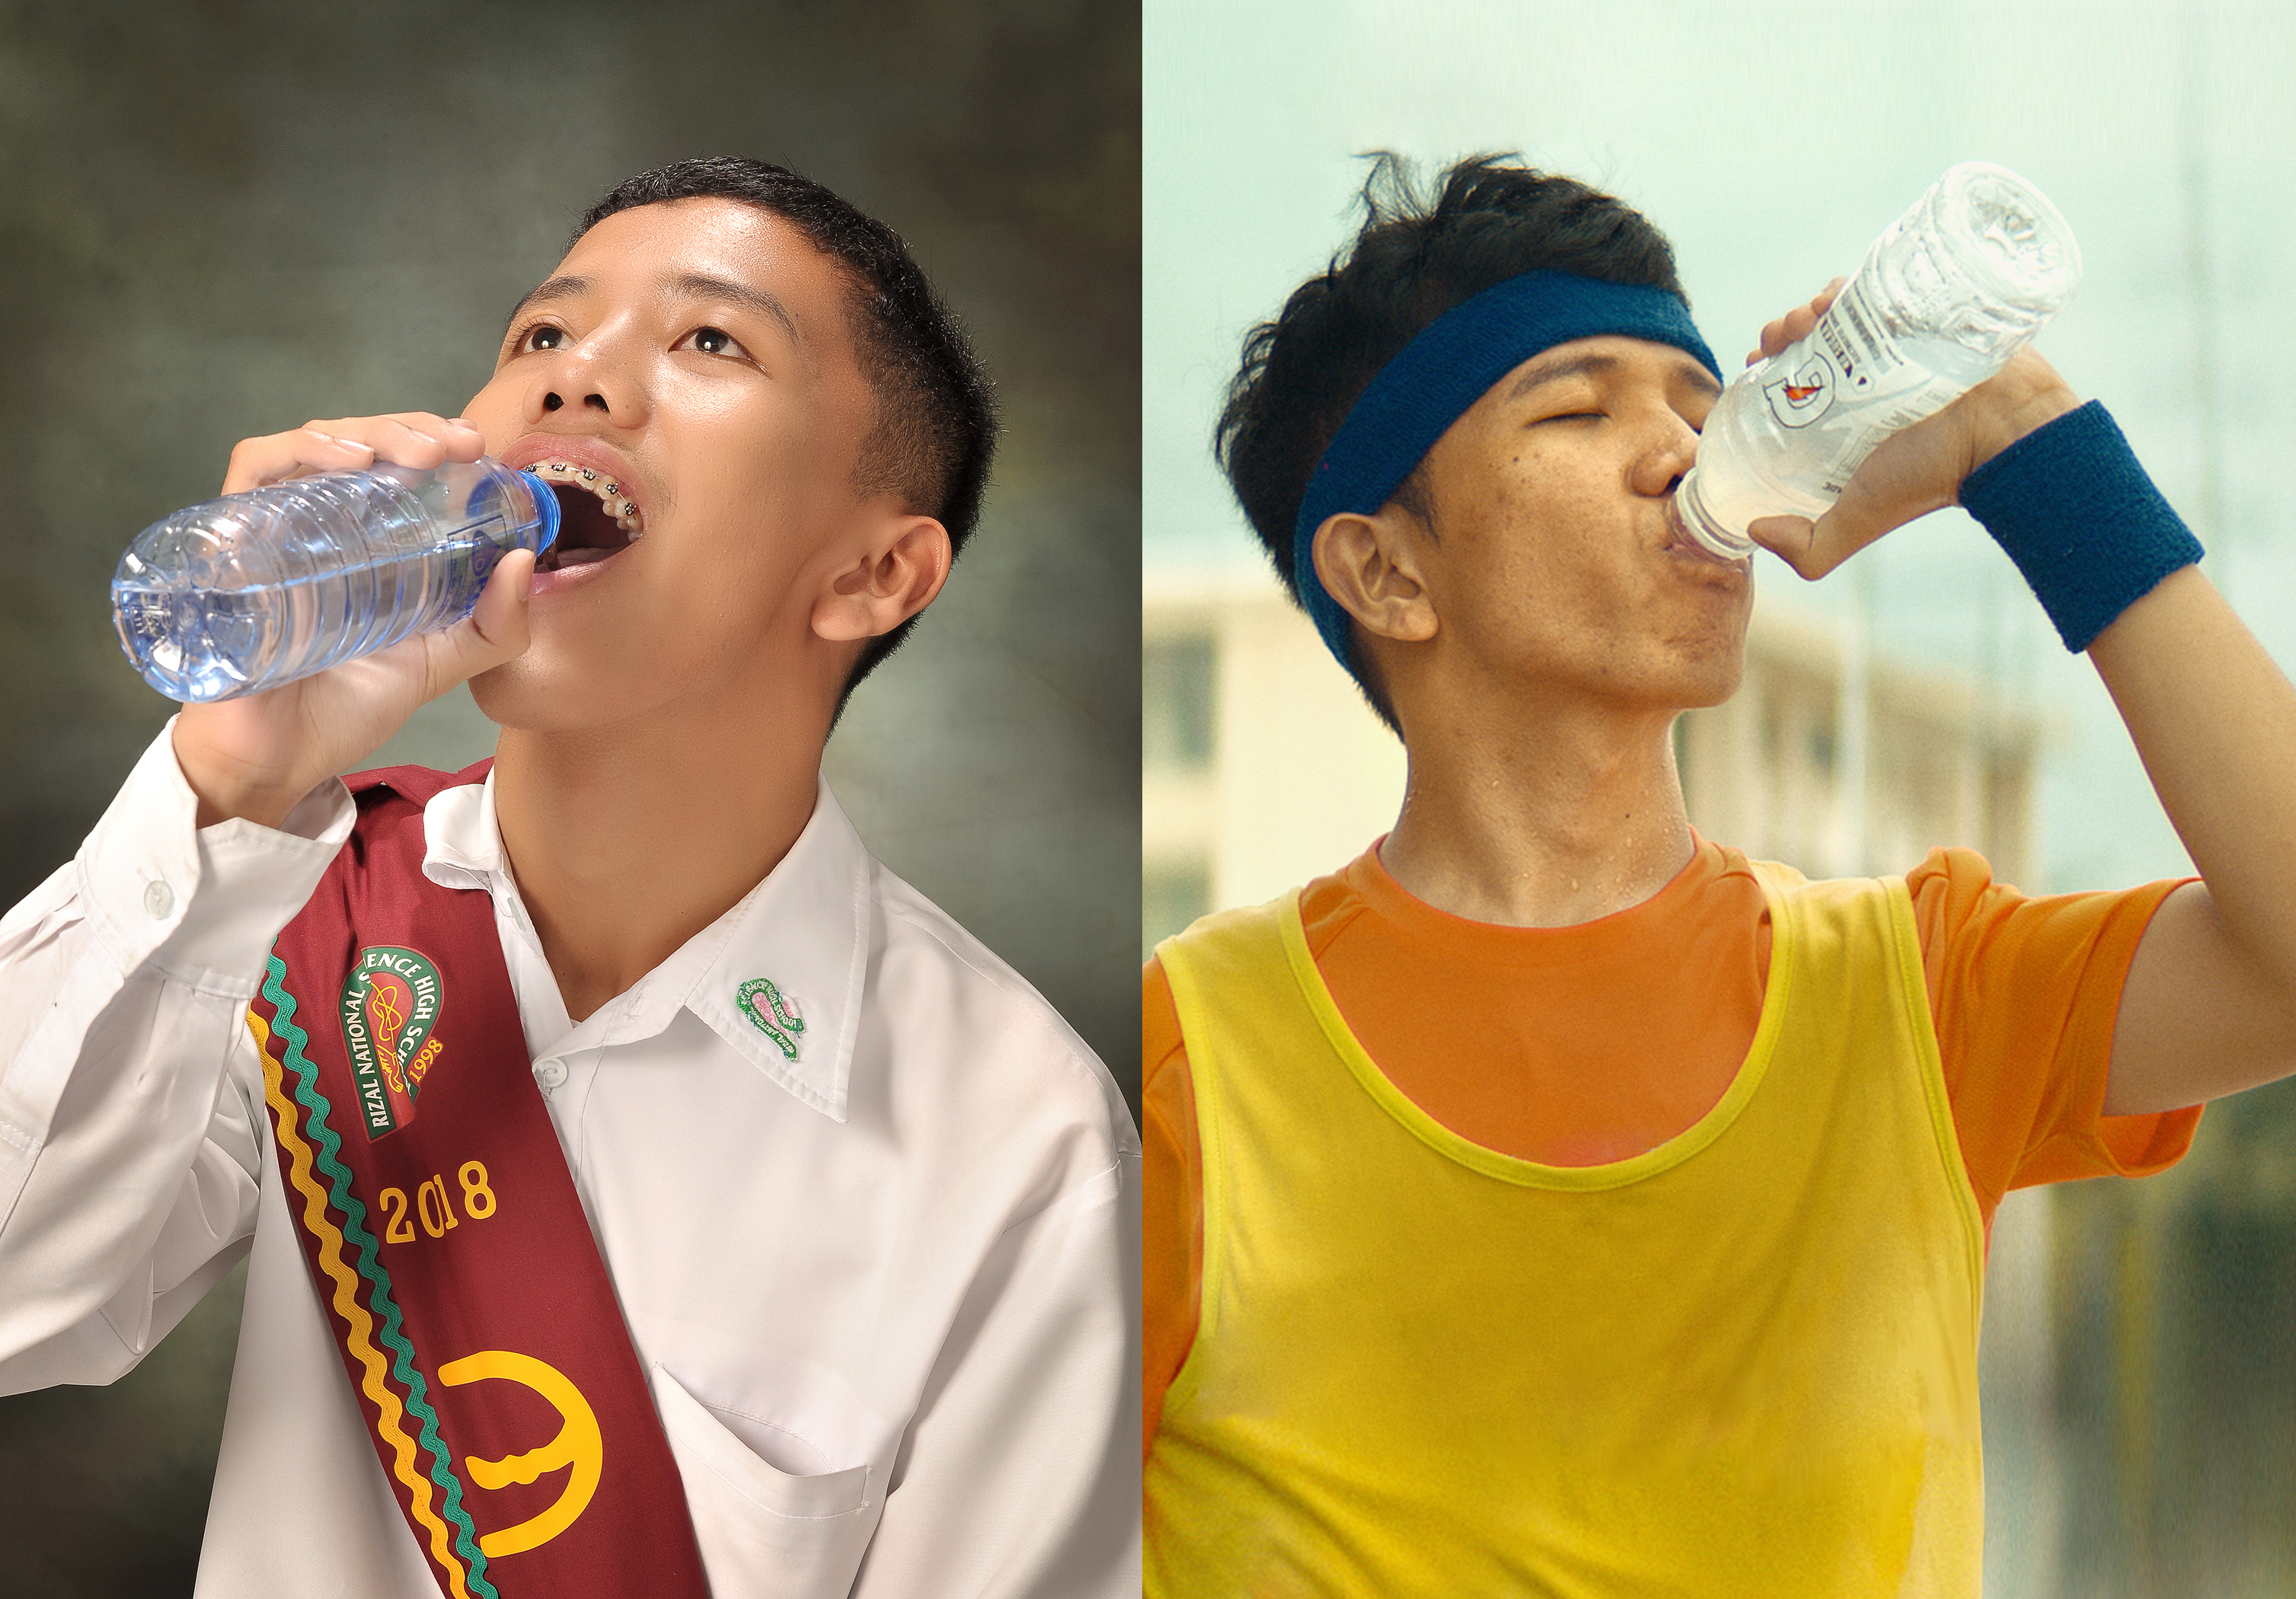 Two side-by-side photos of boys drinking. One is drinking water and the other is drinking gatorade